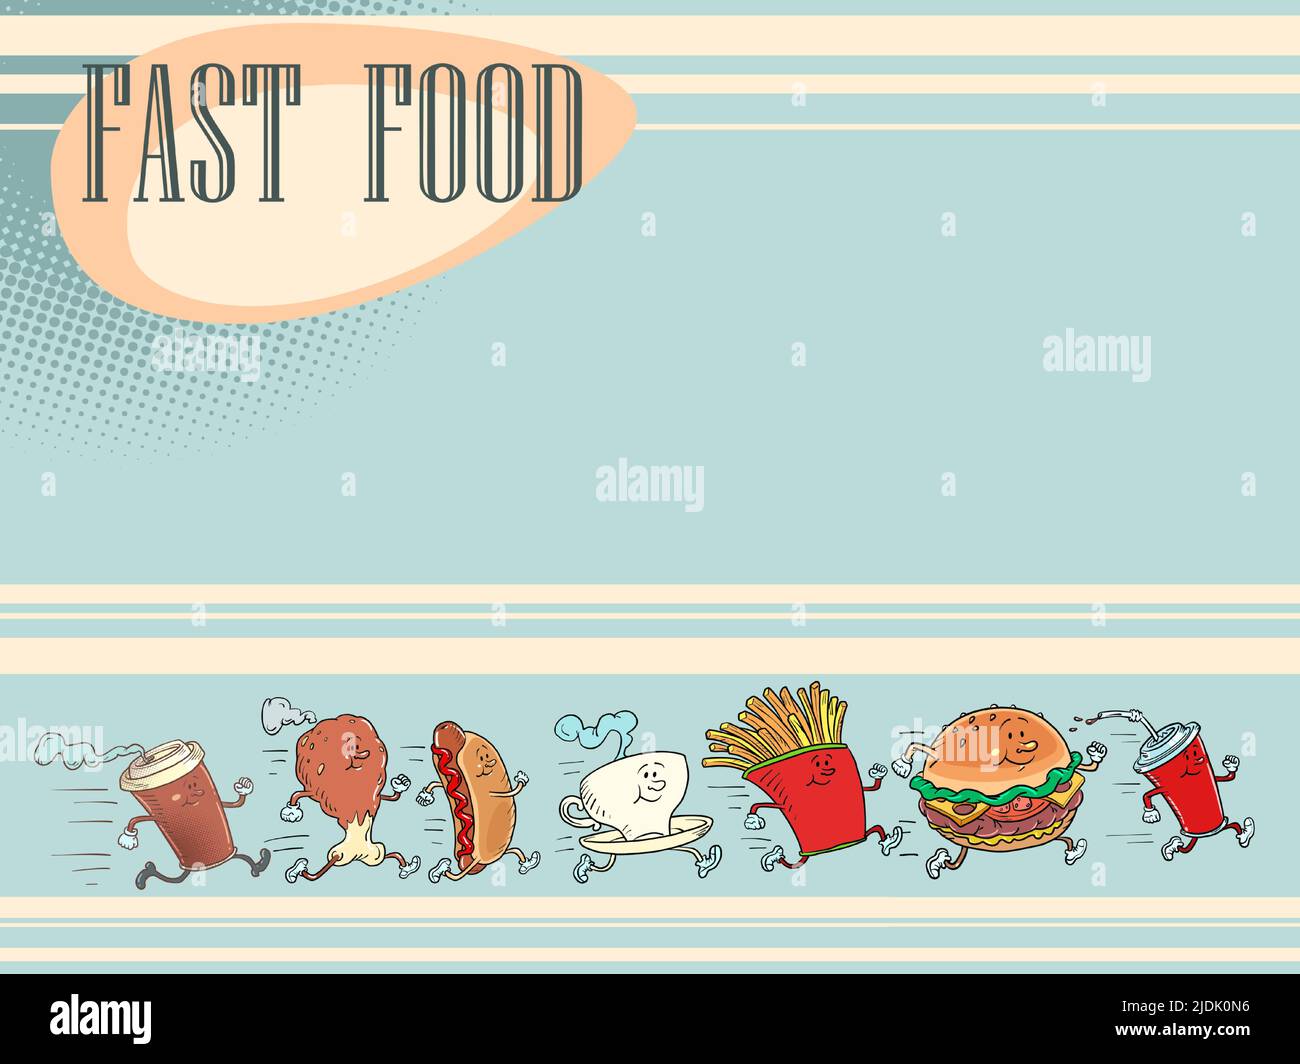 Fast food products restaurant menu background. Burger fries drink cola chicken leg hot dog coffee cup Stock Vector